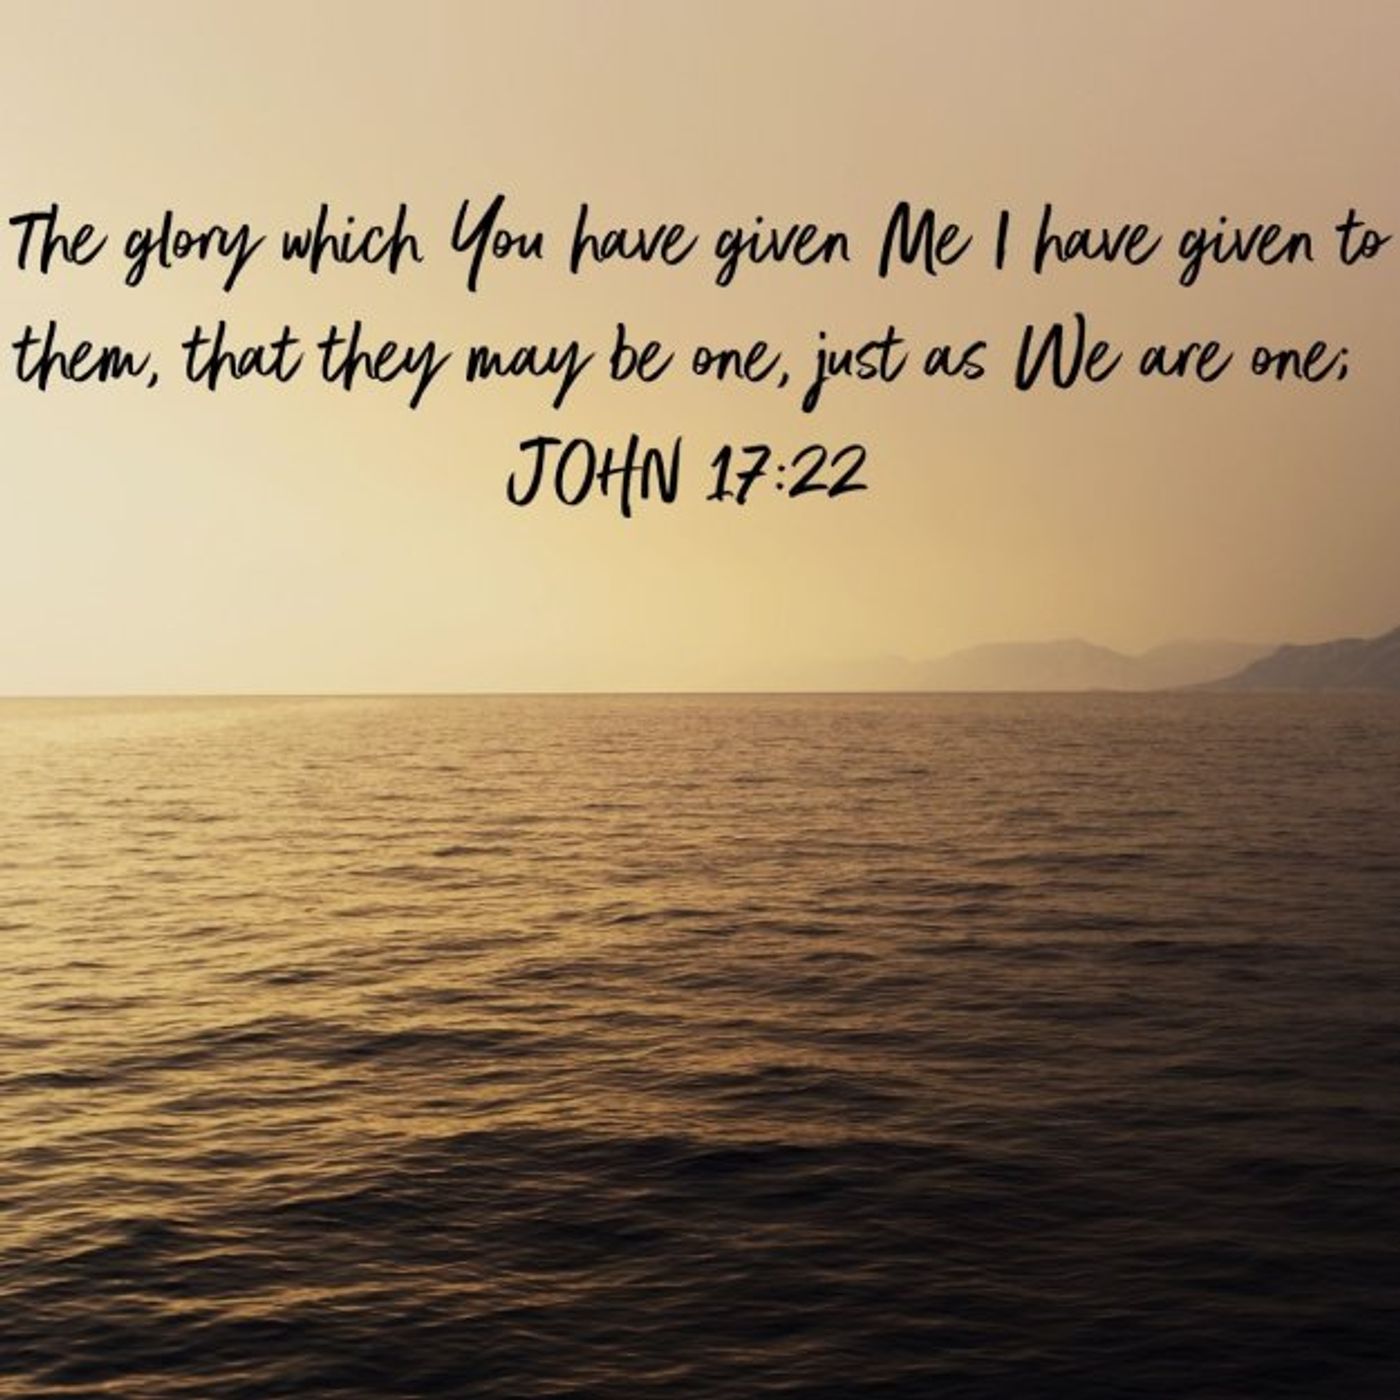 John 17:22: What Glory is Jesus Referring To? | Theology Central